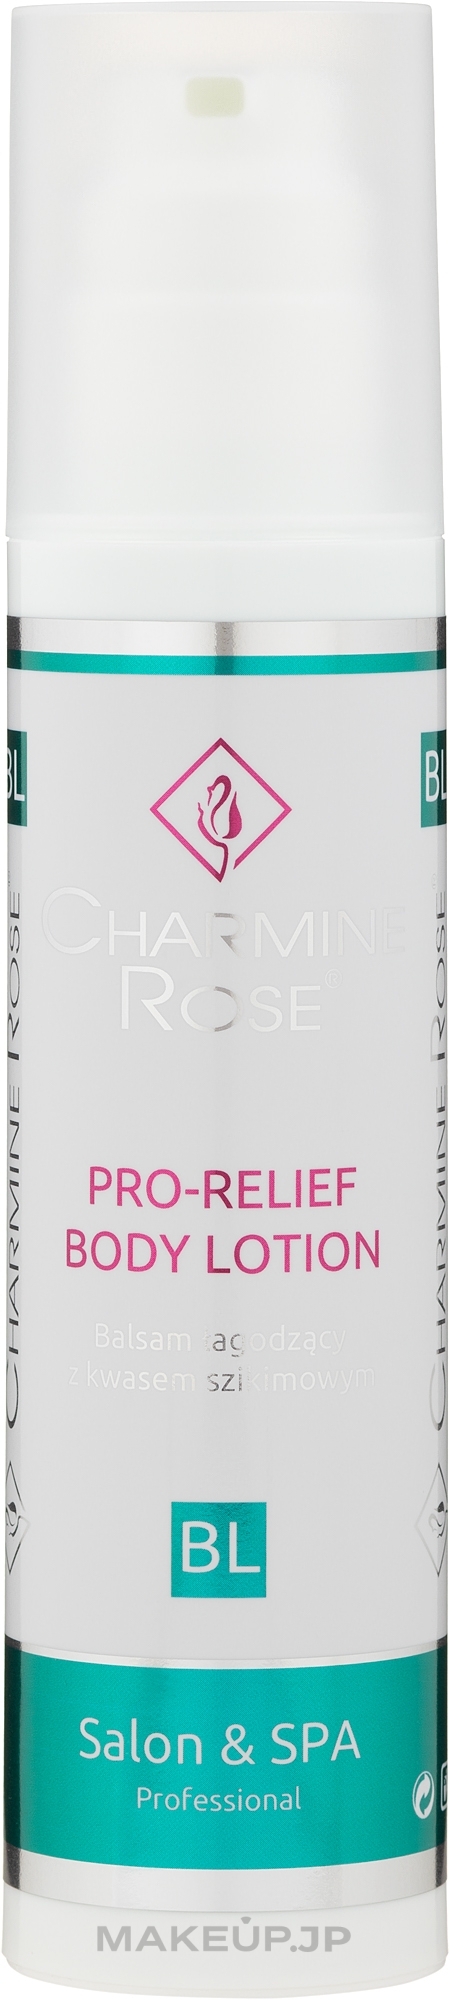 Soothing Body Balm - Charmine Rose Pro-Relief Body Lotion — photo 200 ml